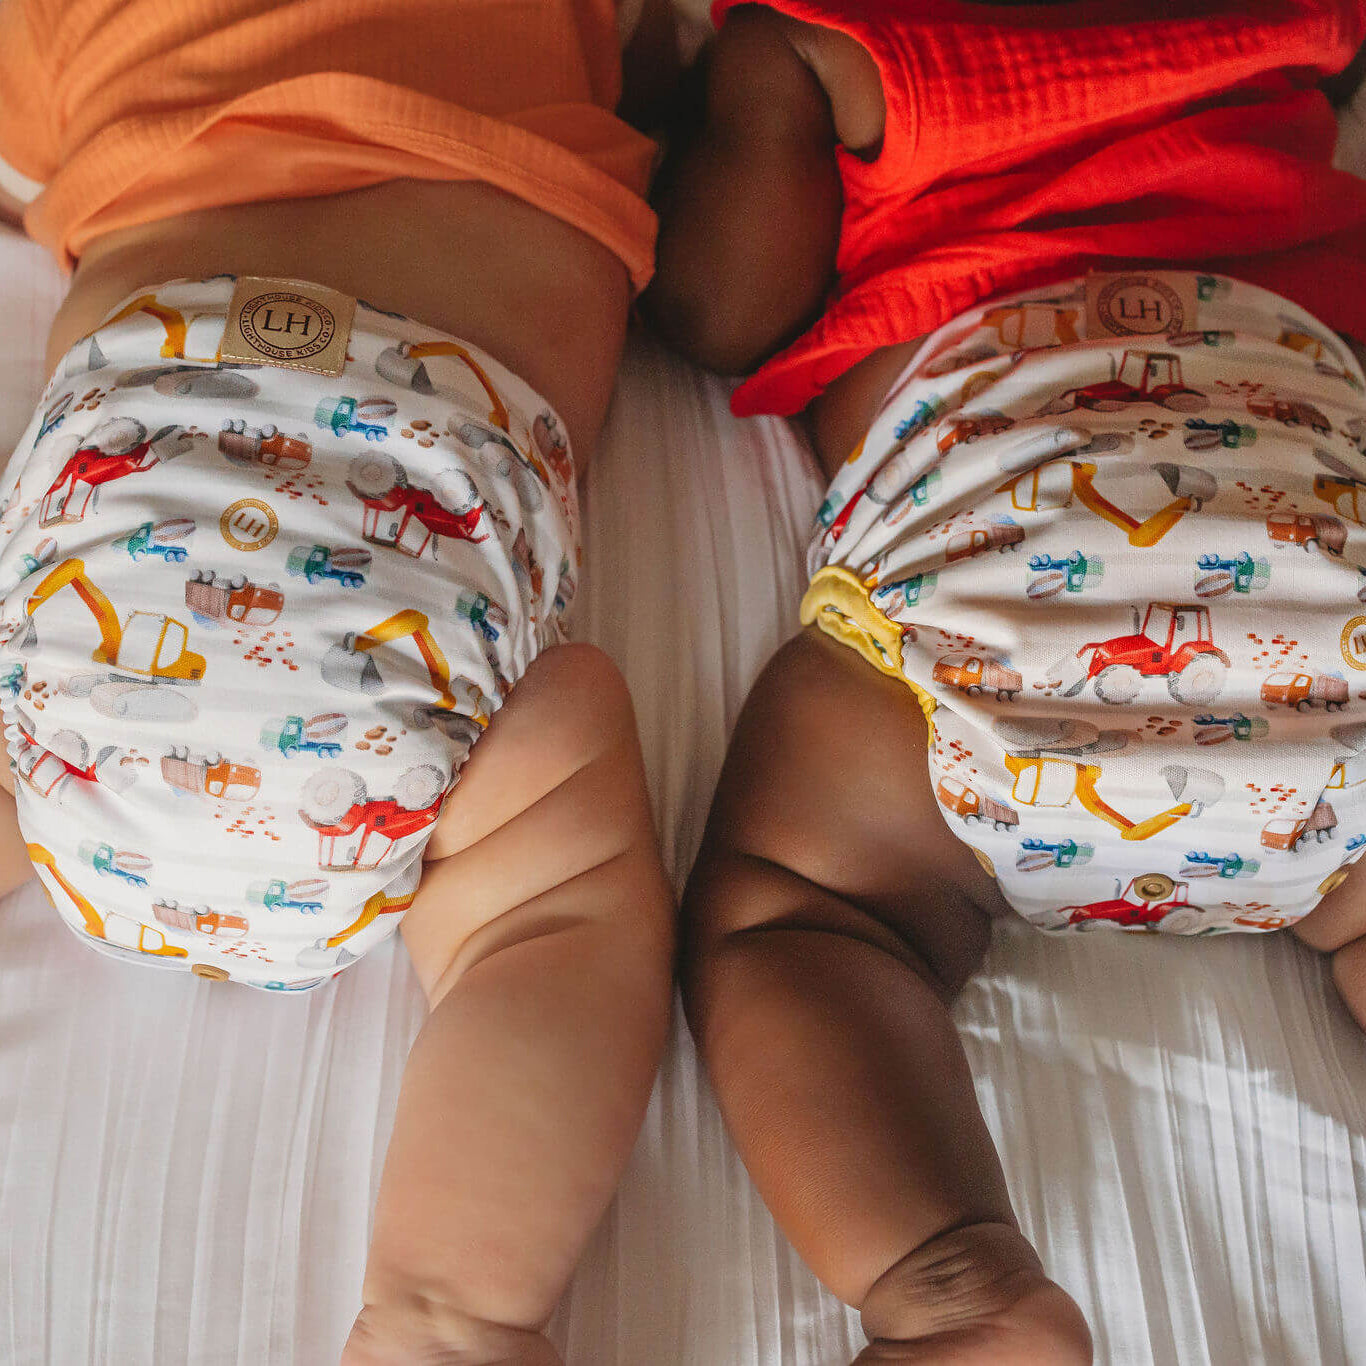 Are Cloth Diapers Better Than Disposables?